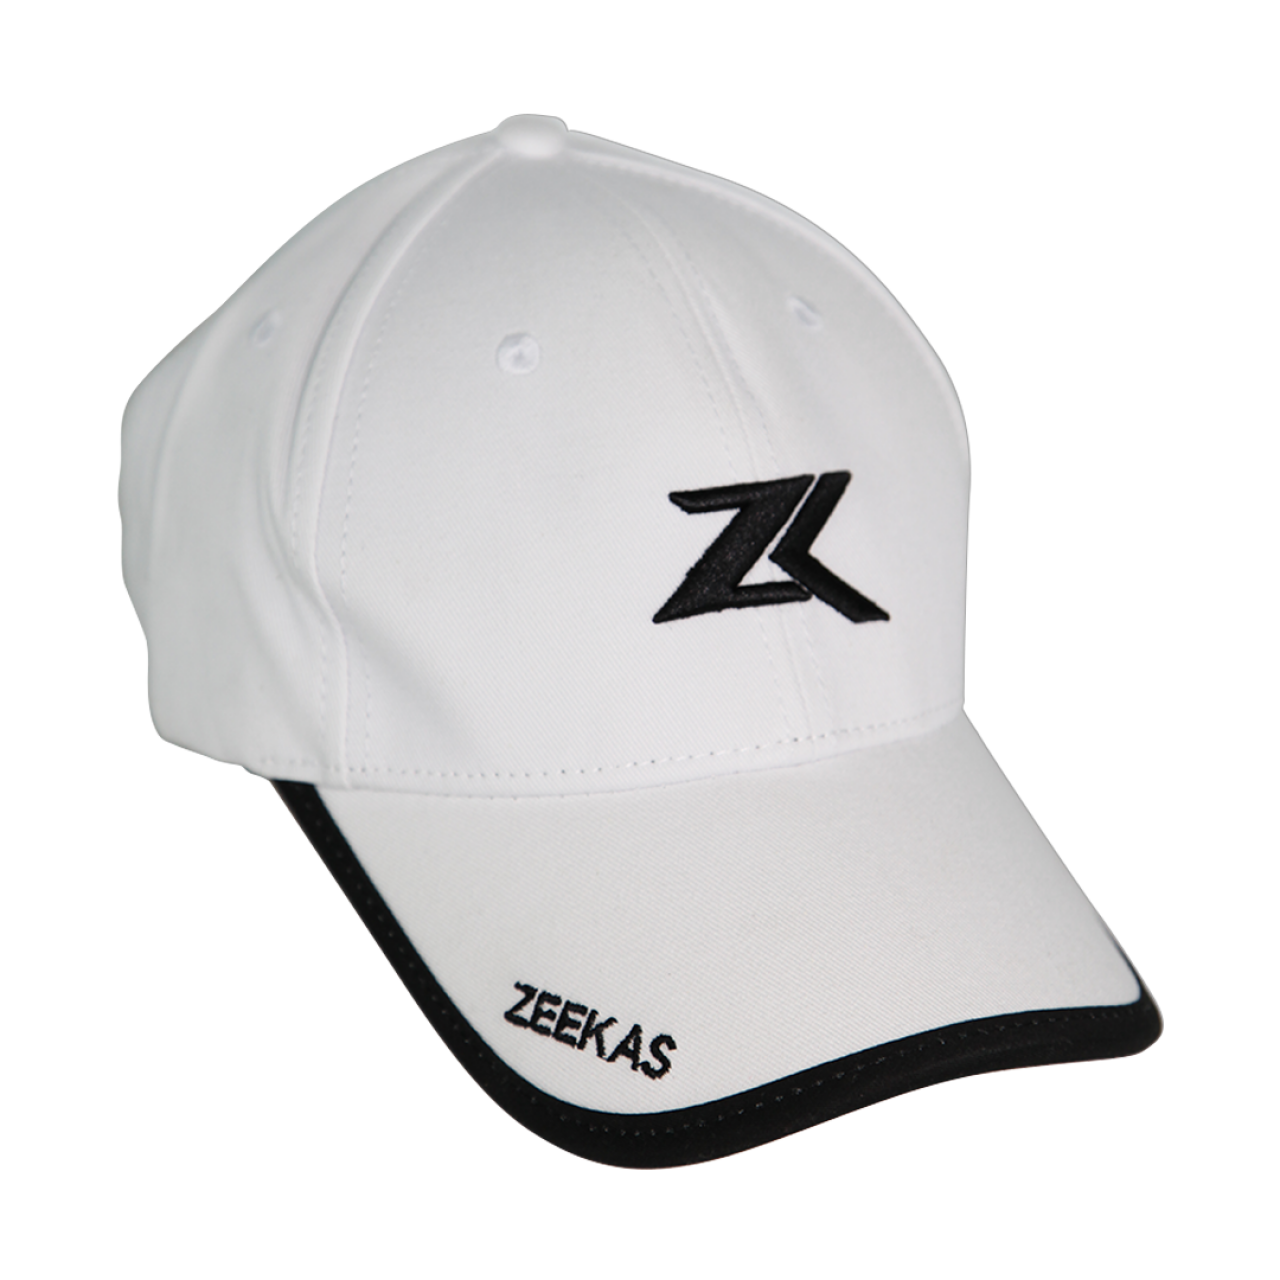 Zeekas ZK Brand Baseball White Plain Hat Cap With Embroidery For Men's and Women's